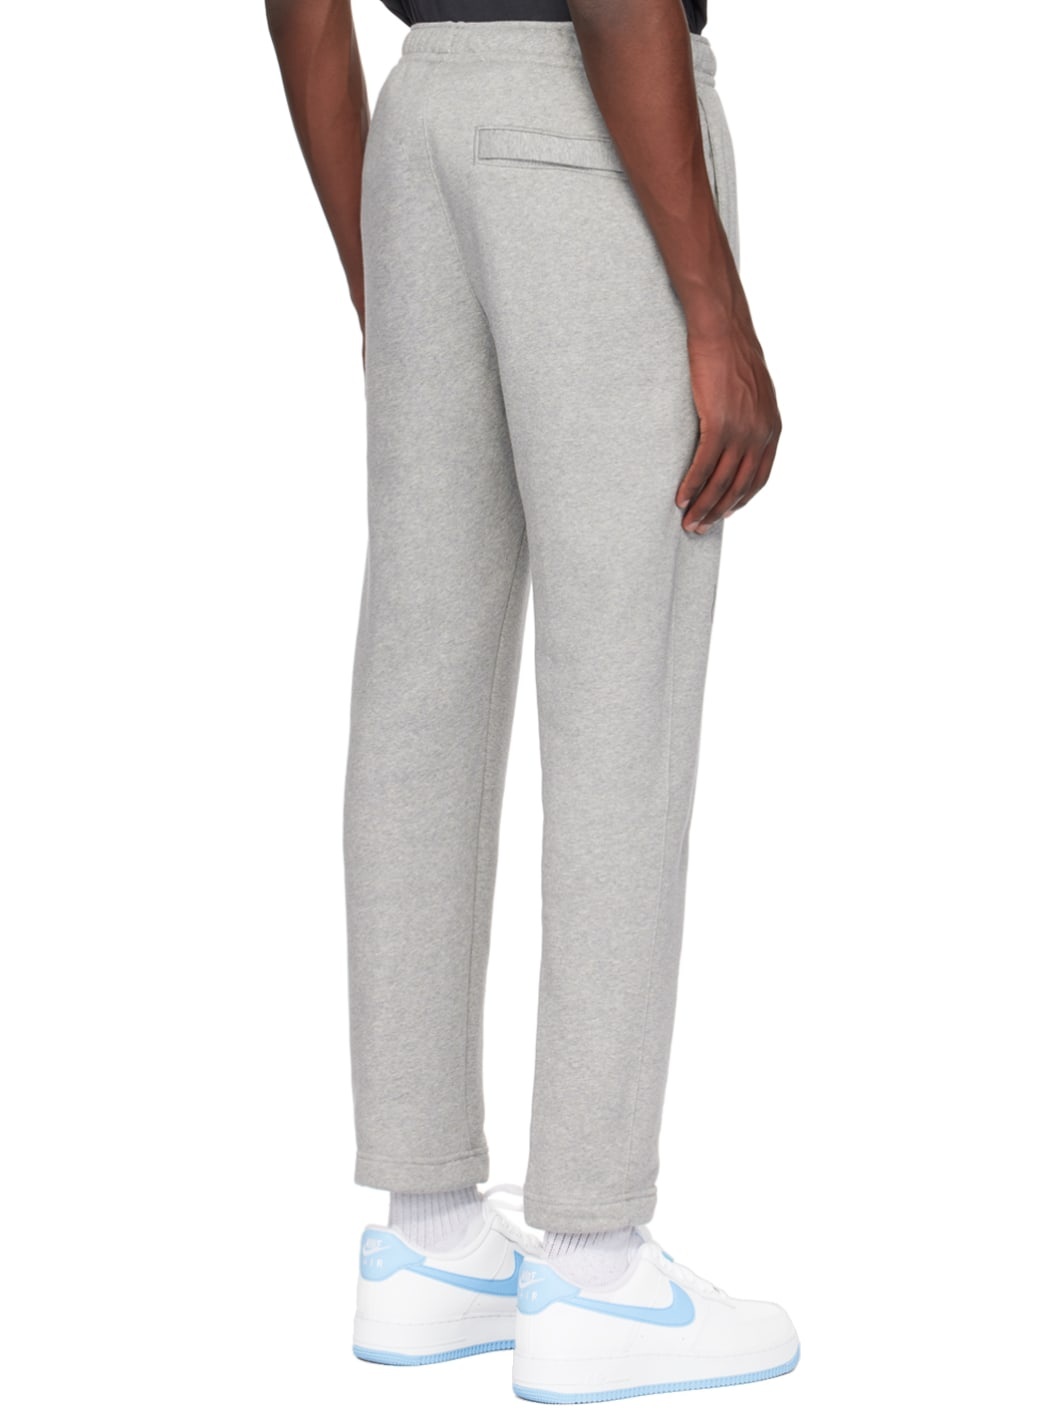 Gray Embroidered Sweatpants - 3